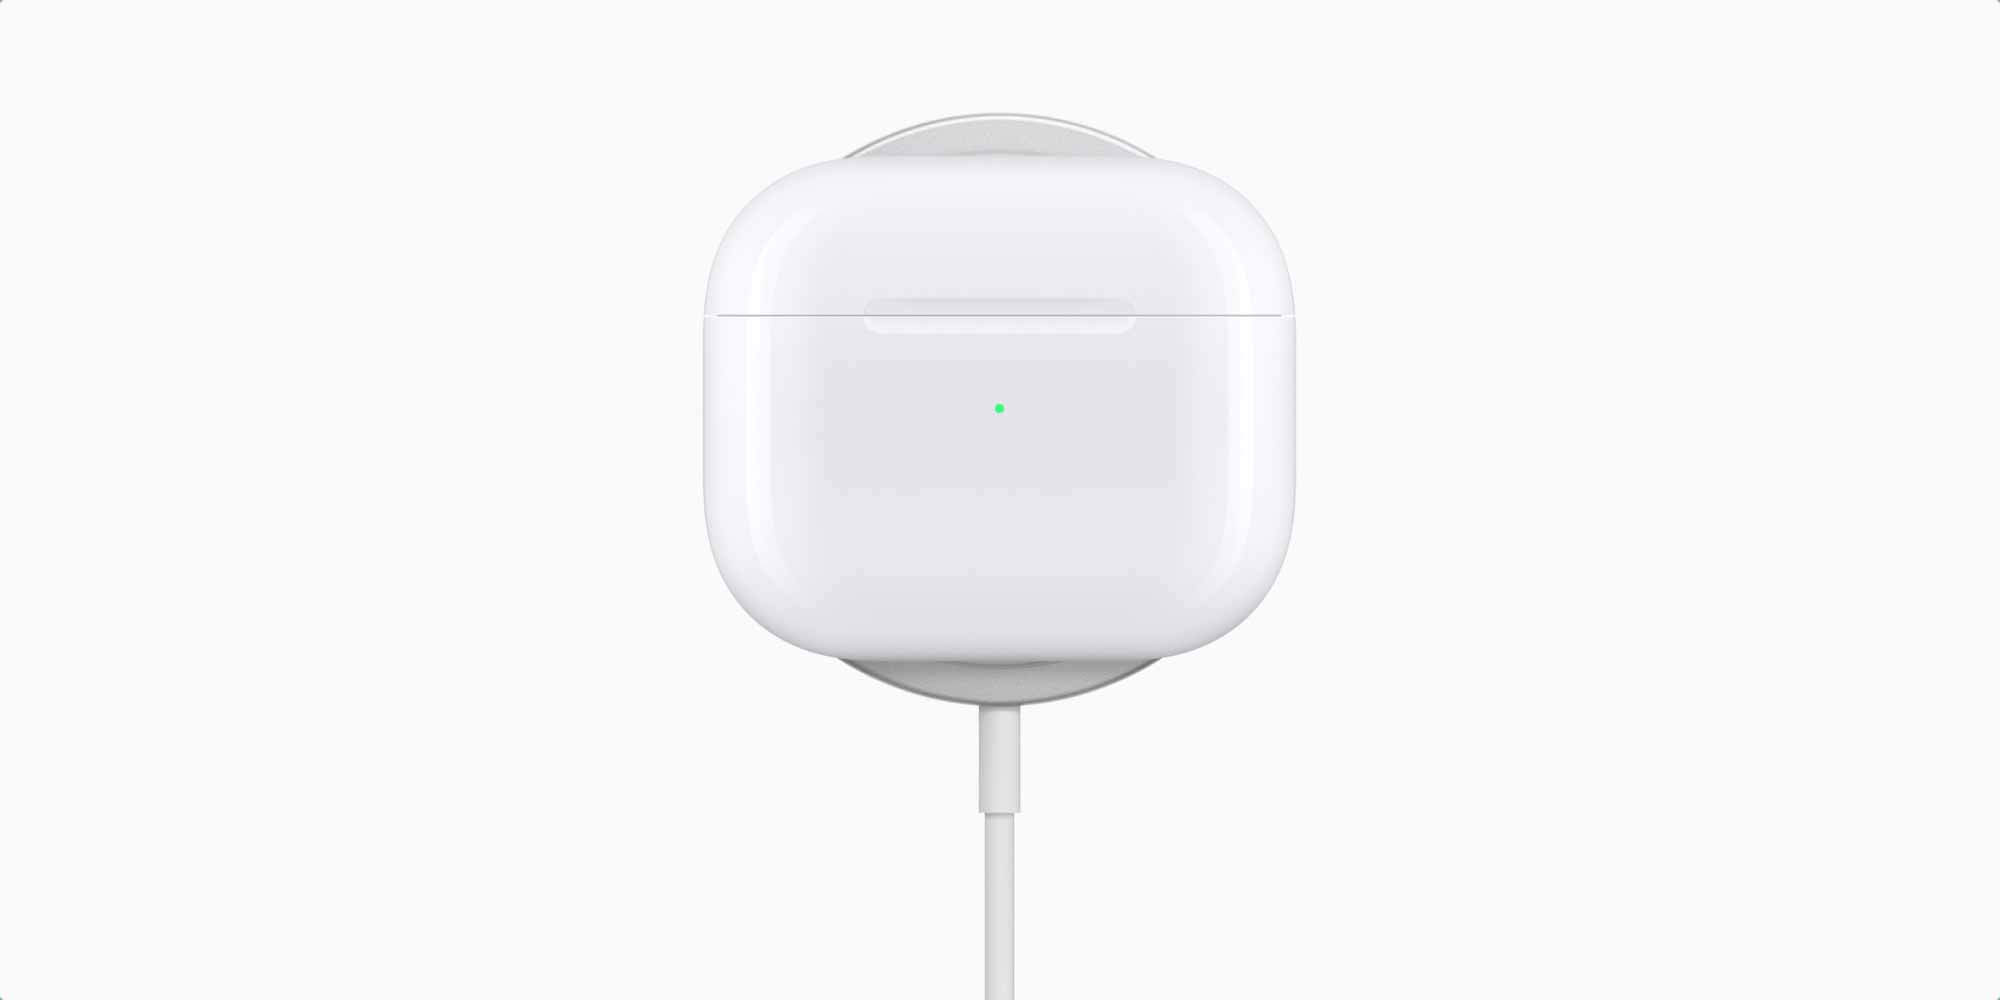 airpods-3-pro-magsafe-charge-case-9to5mac